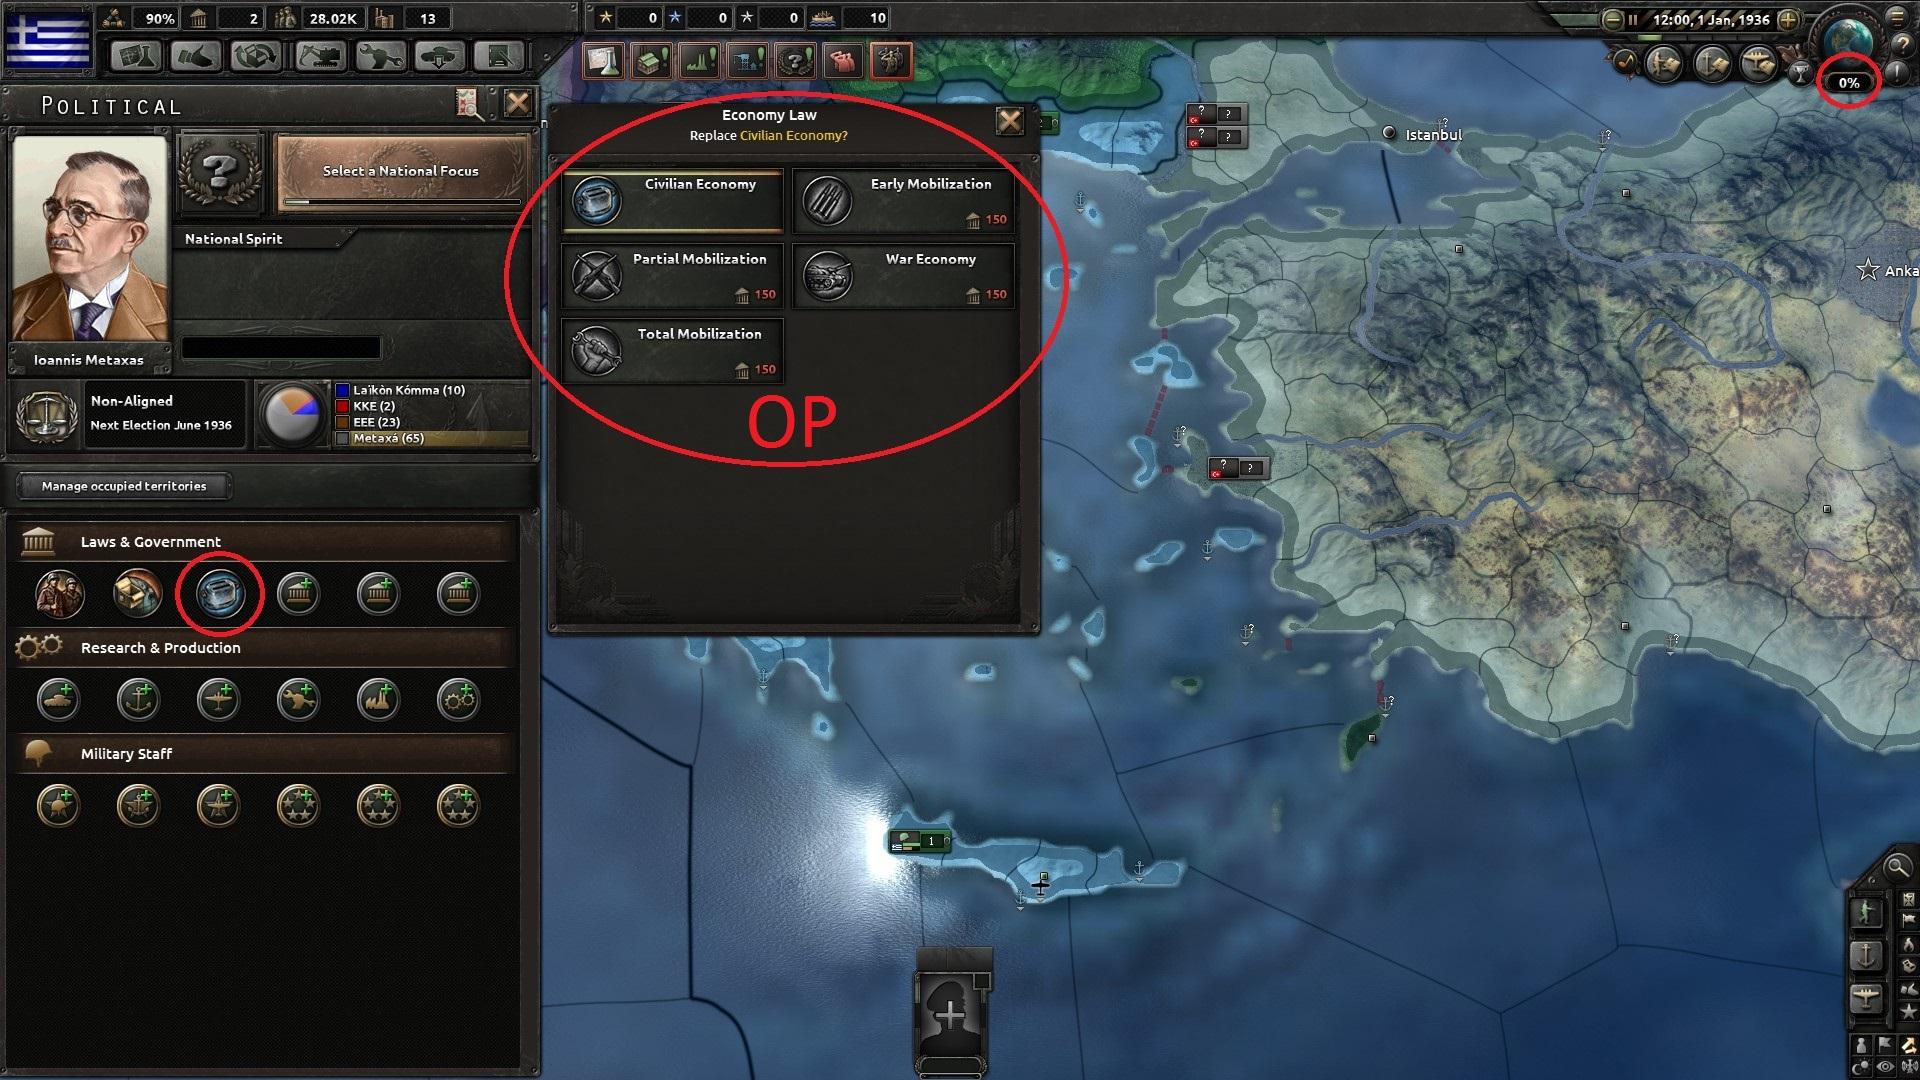 Hearts of iron 4 production efficiency and power